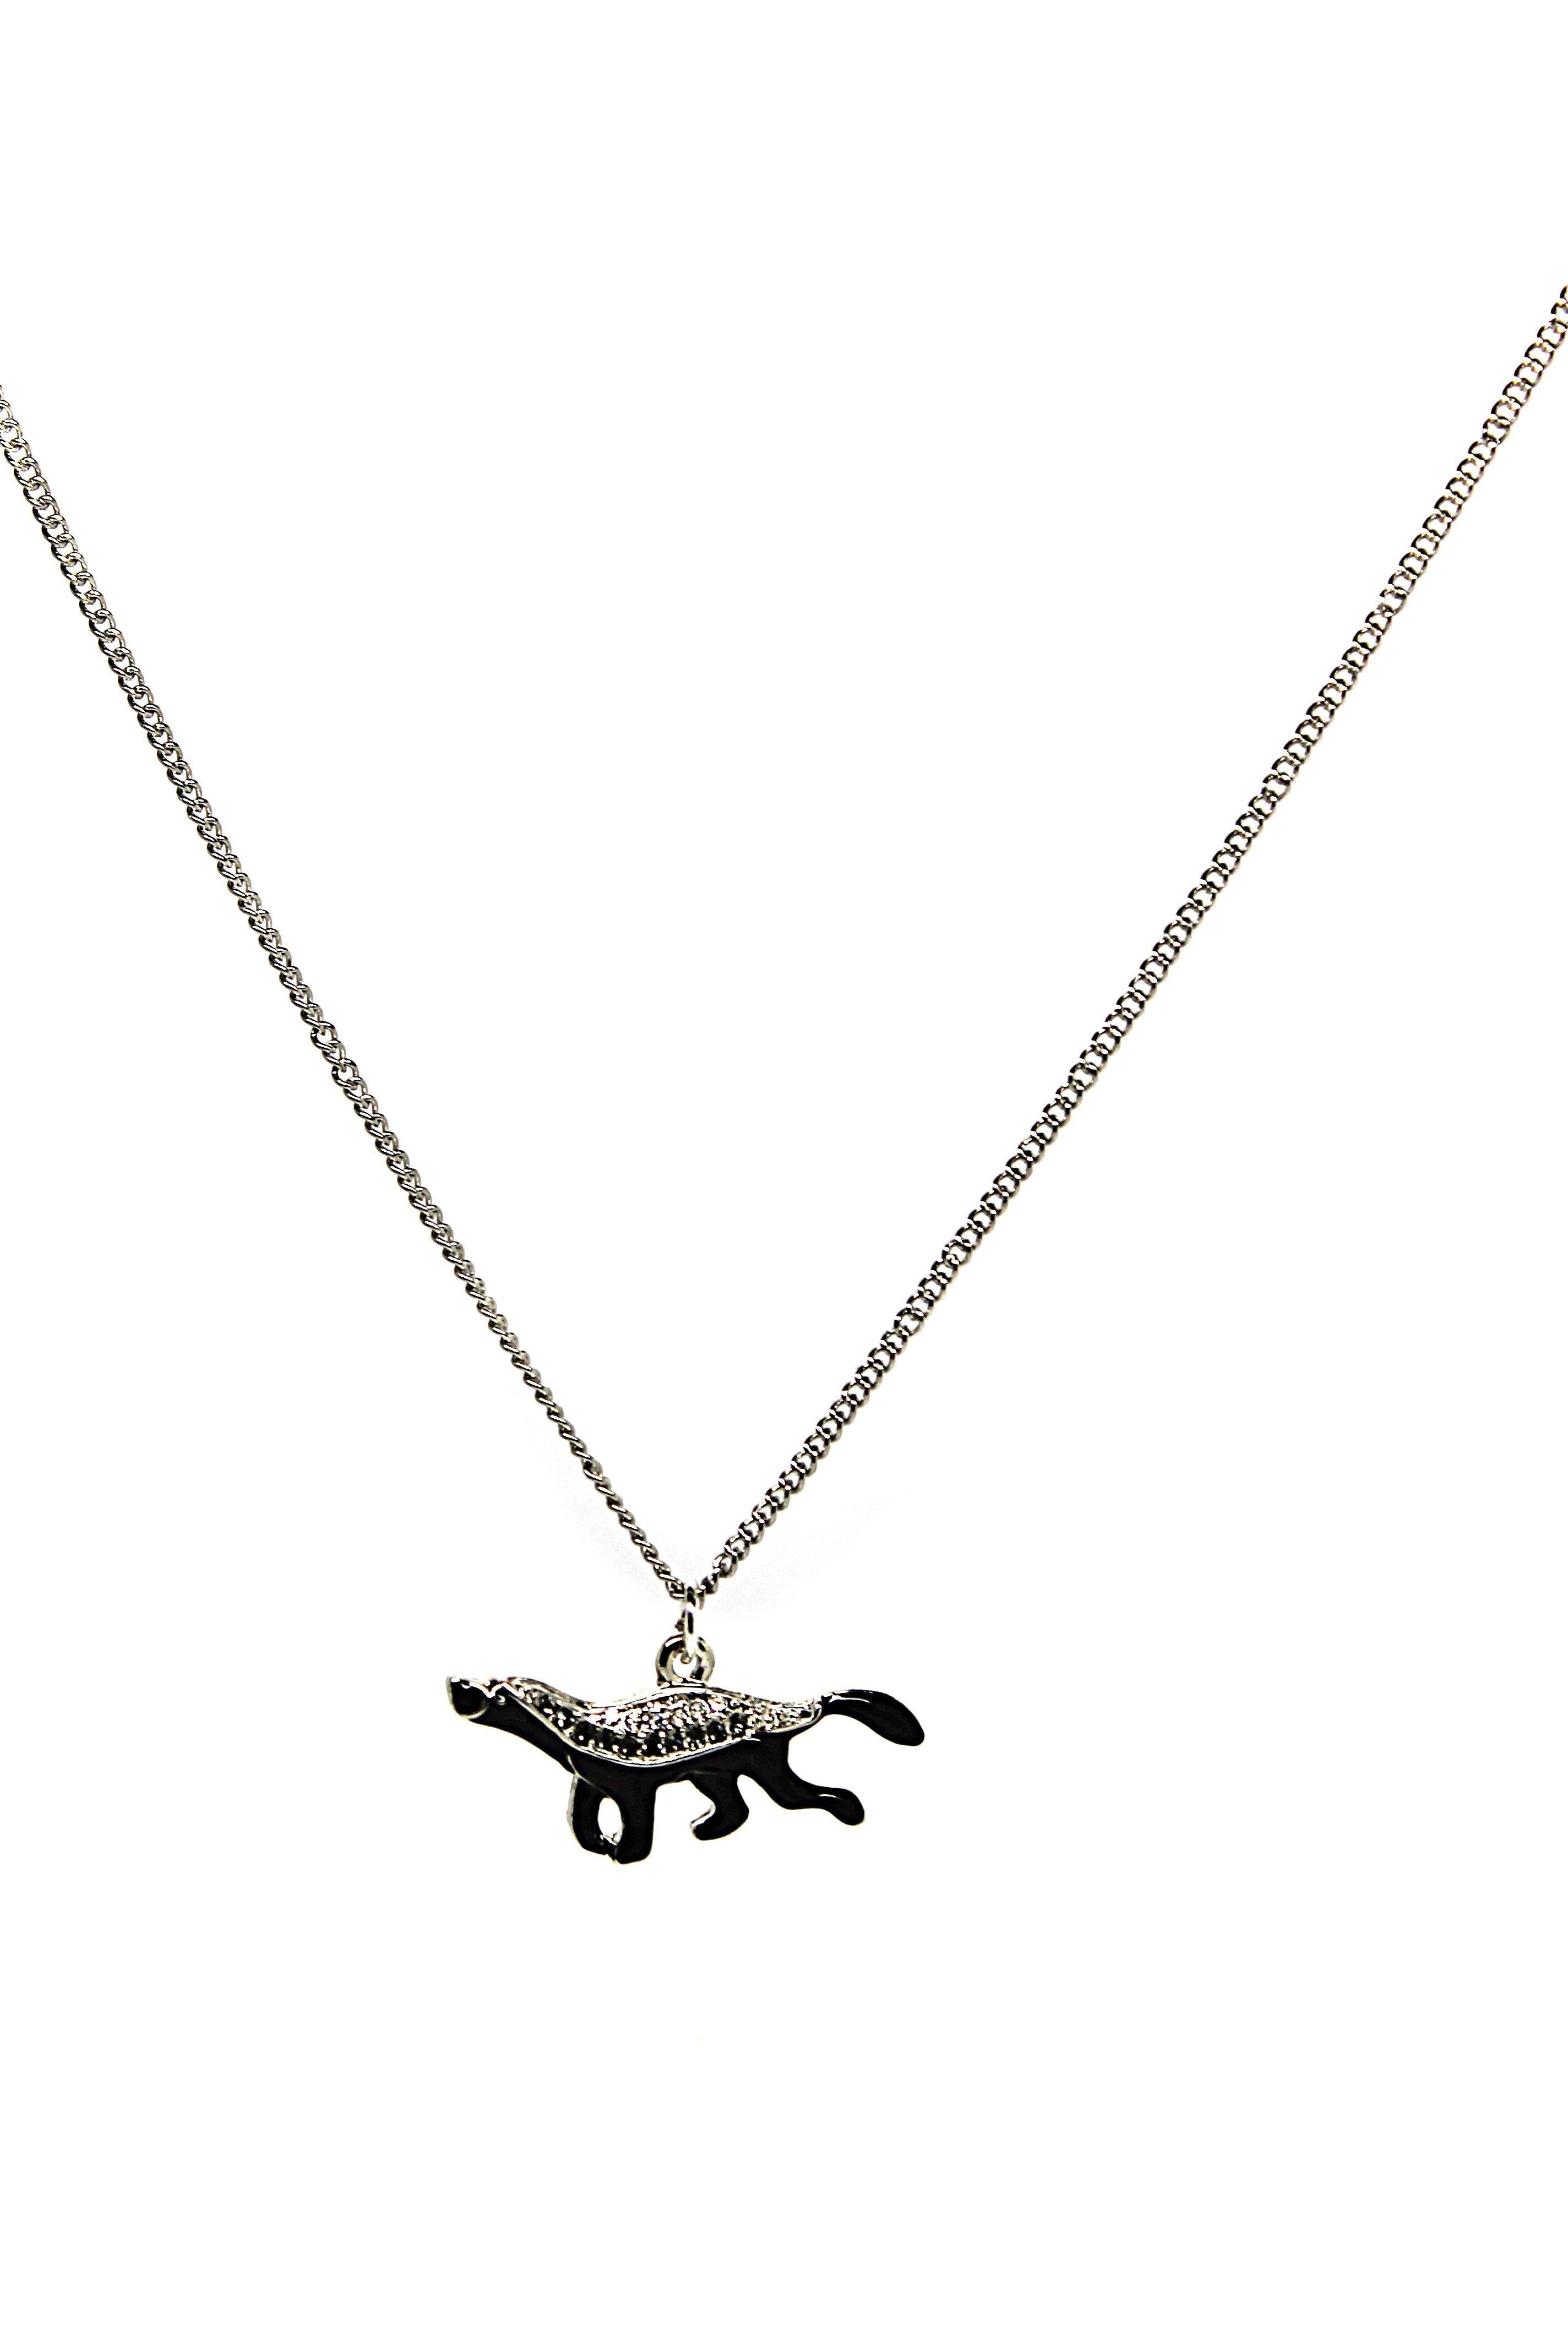 Honey Badger Necklace - Wildtouch - Wildtouch